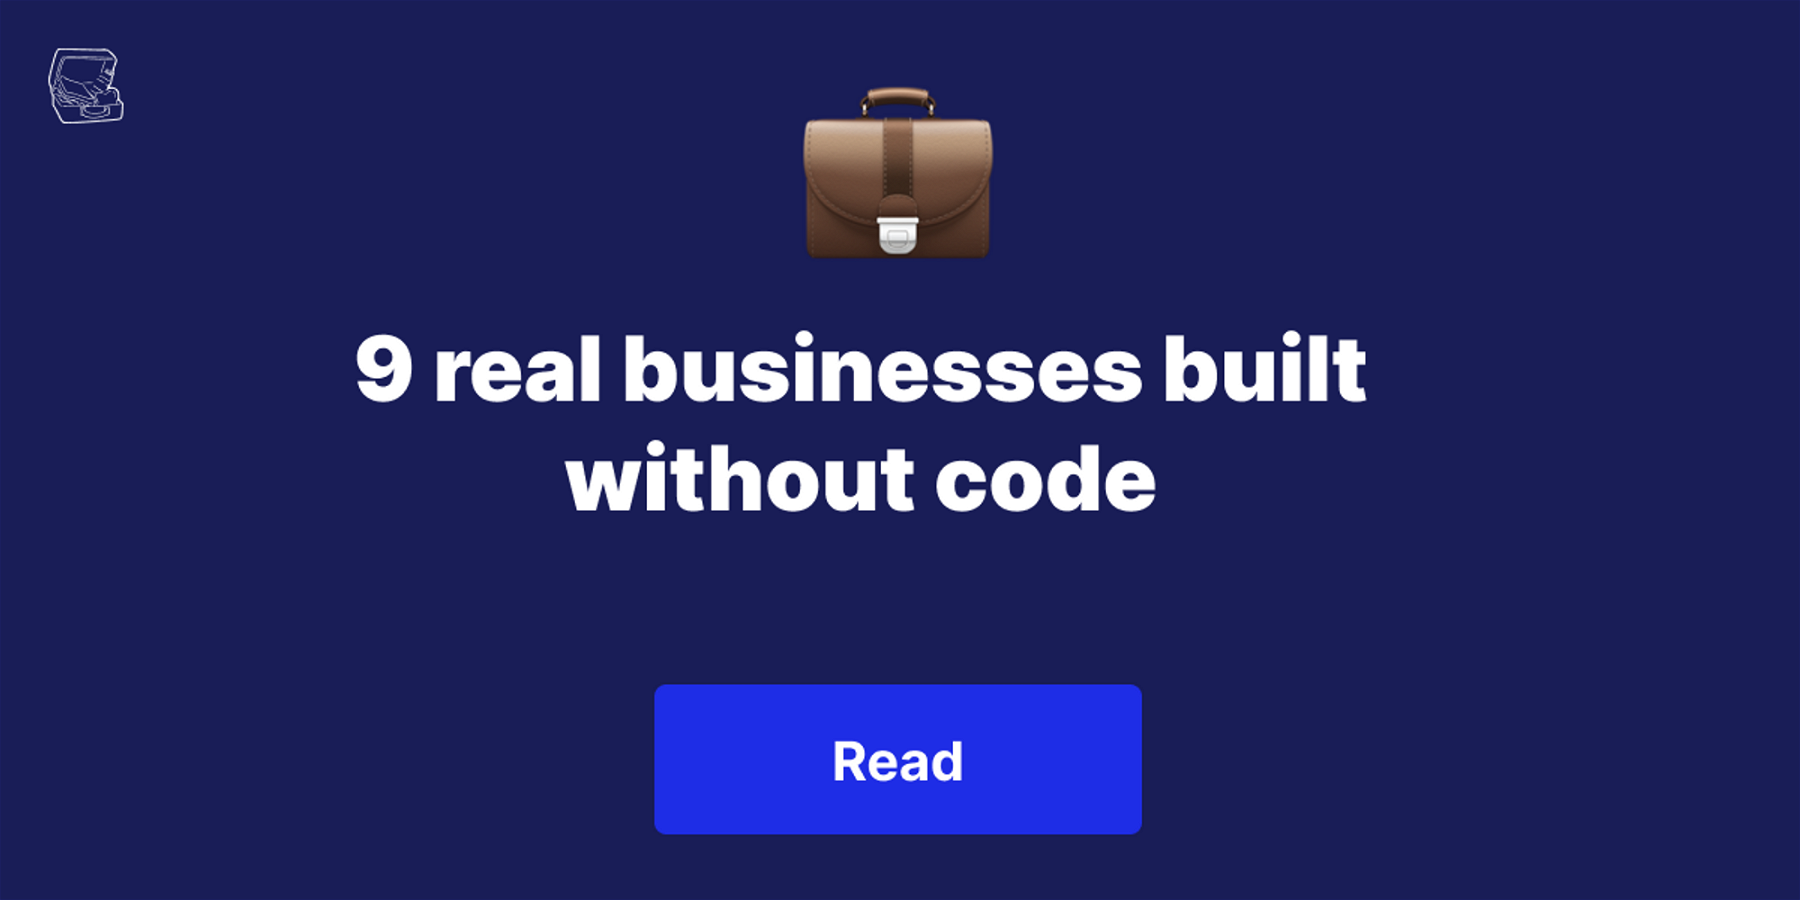 9 real businesses built without code